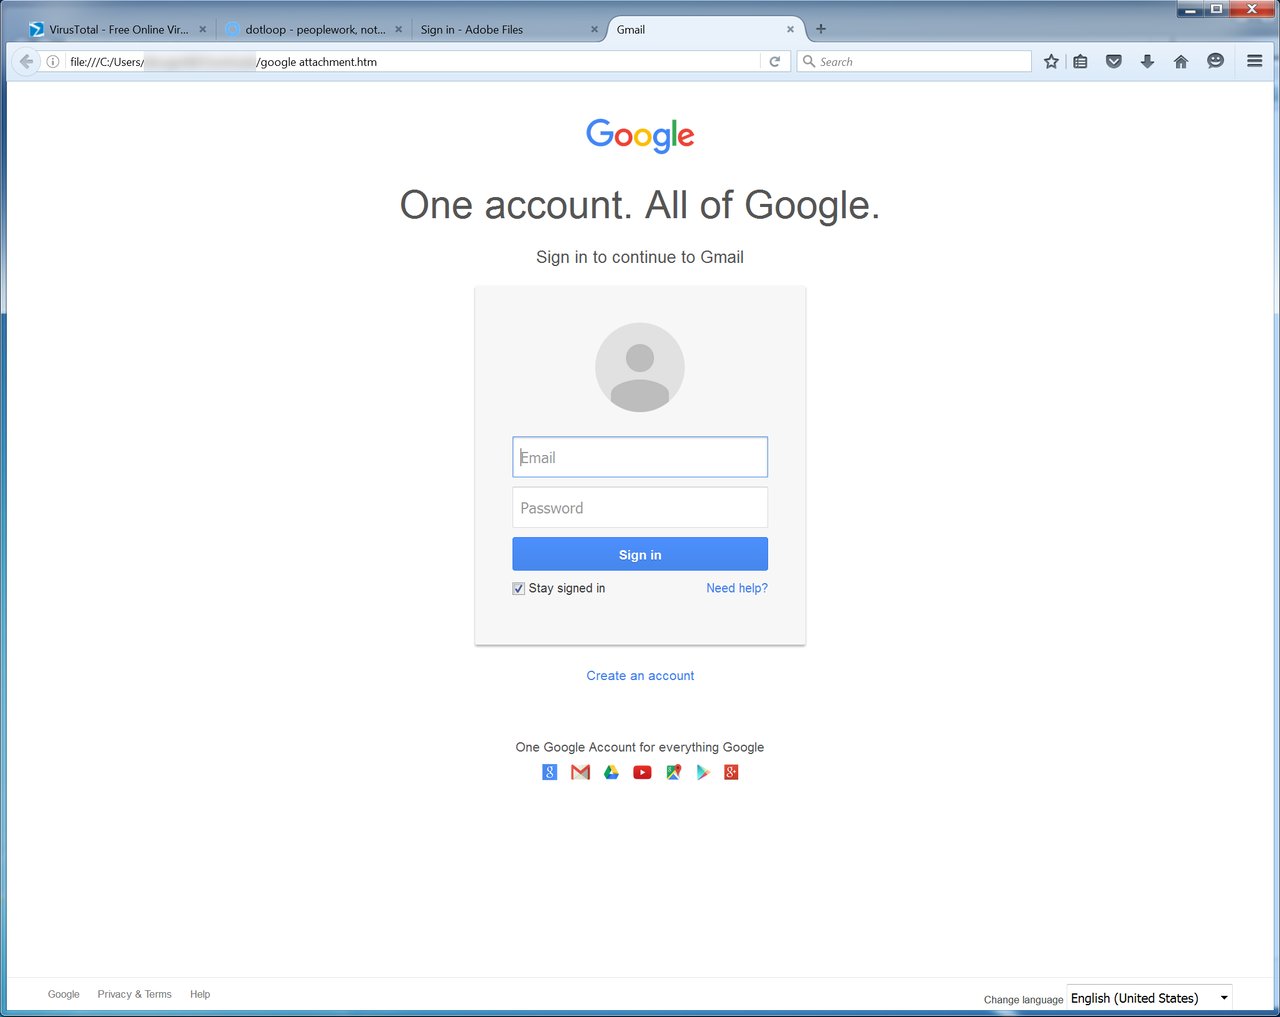 Simulated Phishing Attack - Google login phishing attack with a phishing managed service